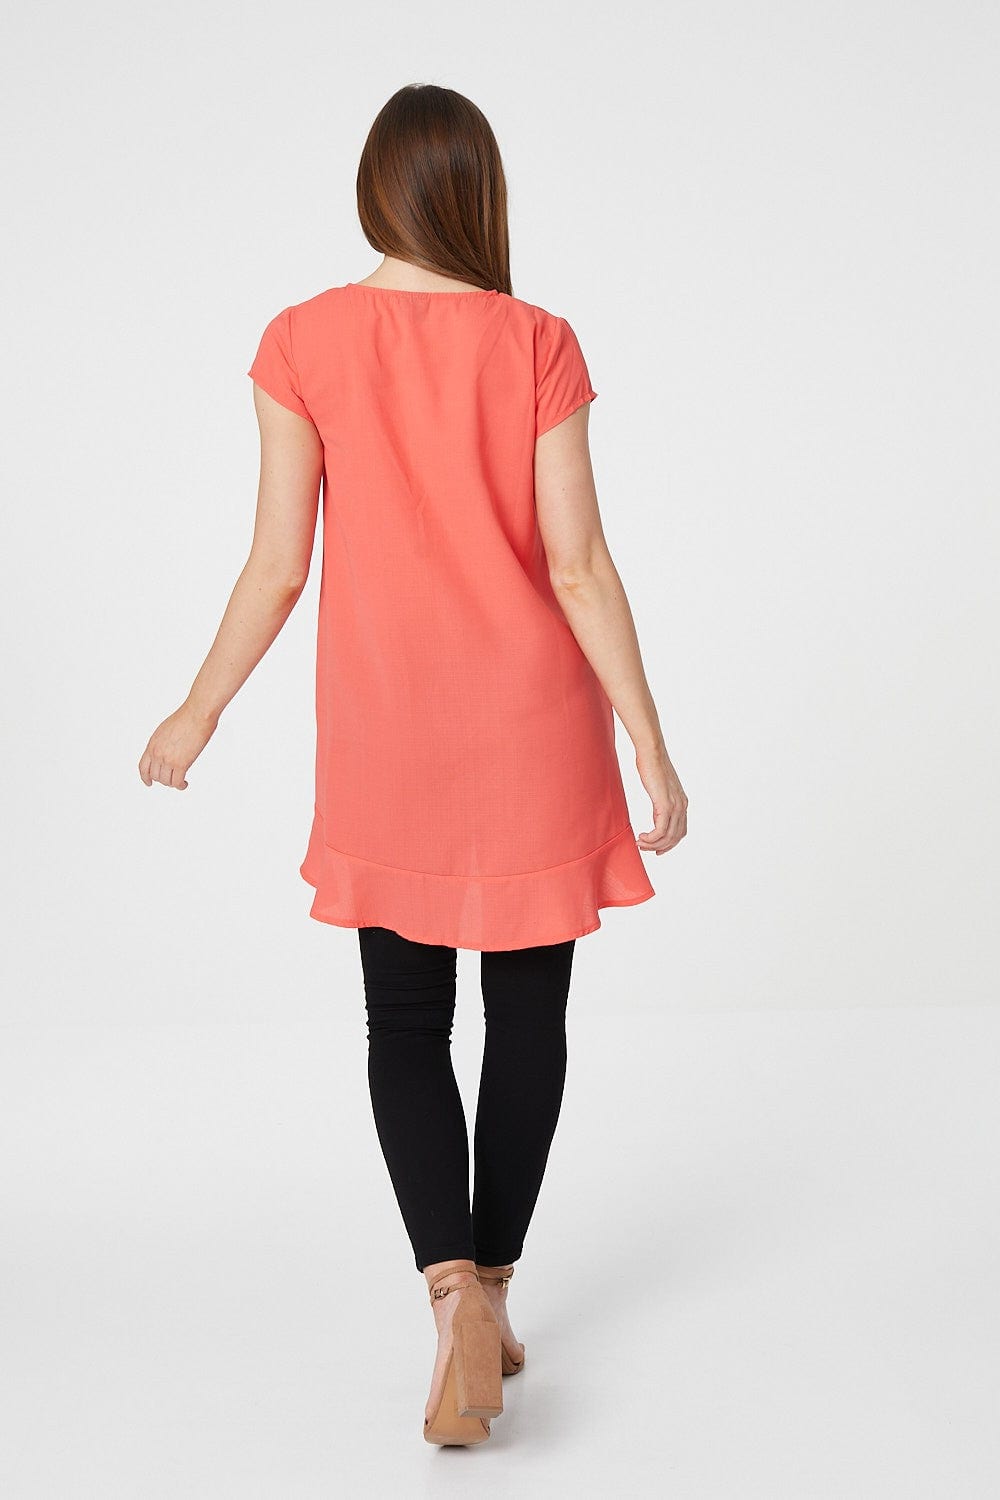 Coral | Cap Sleeve High Low Blouse